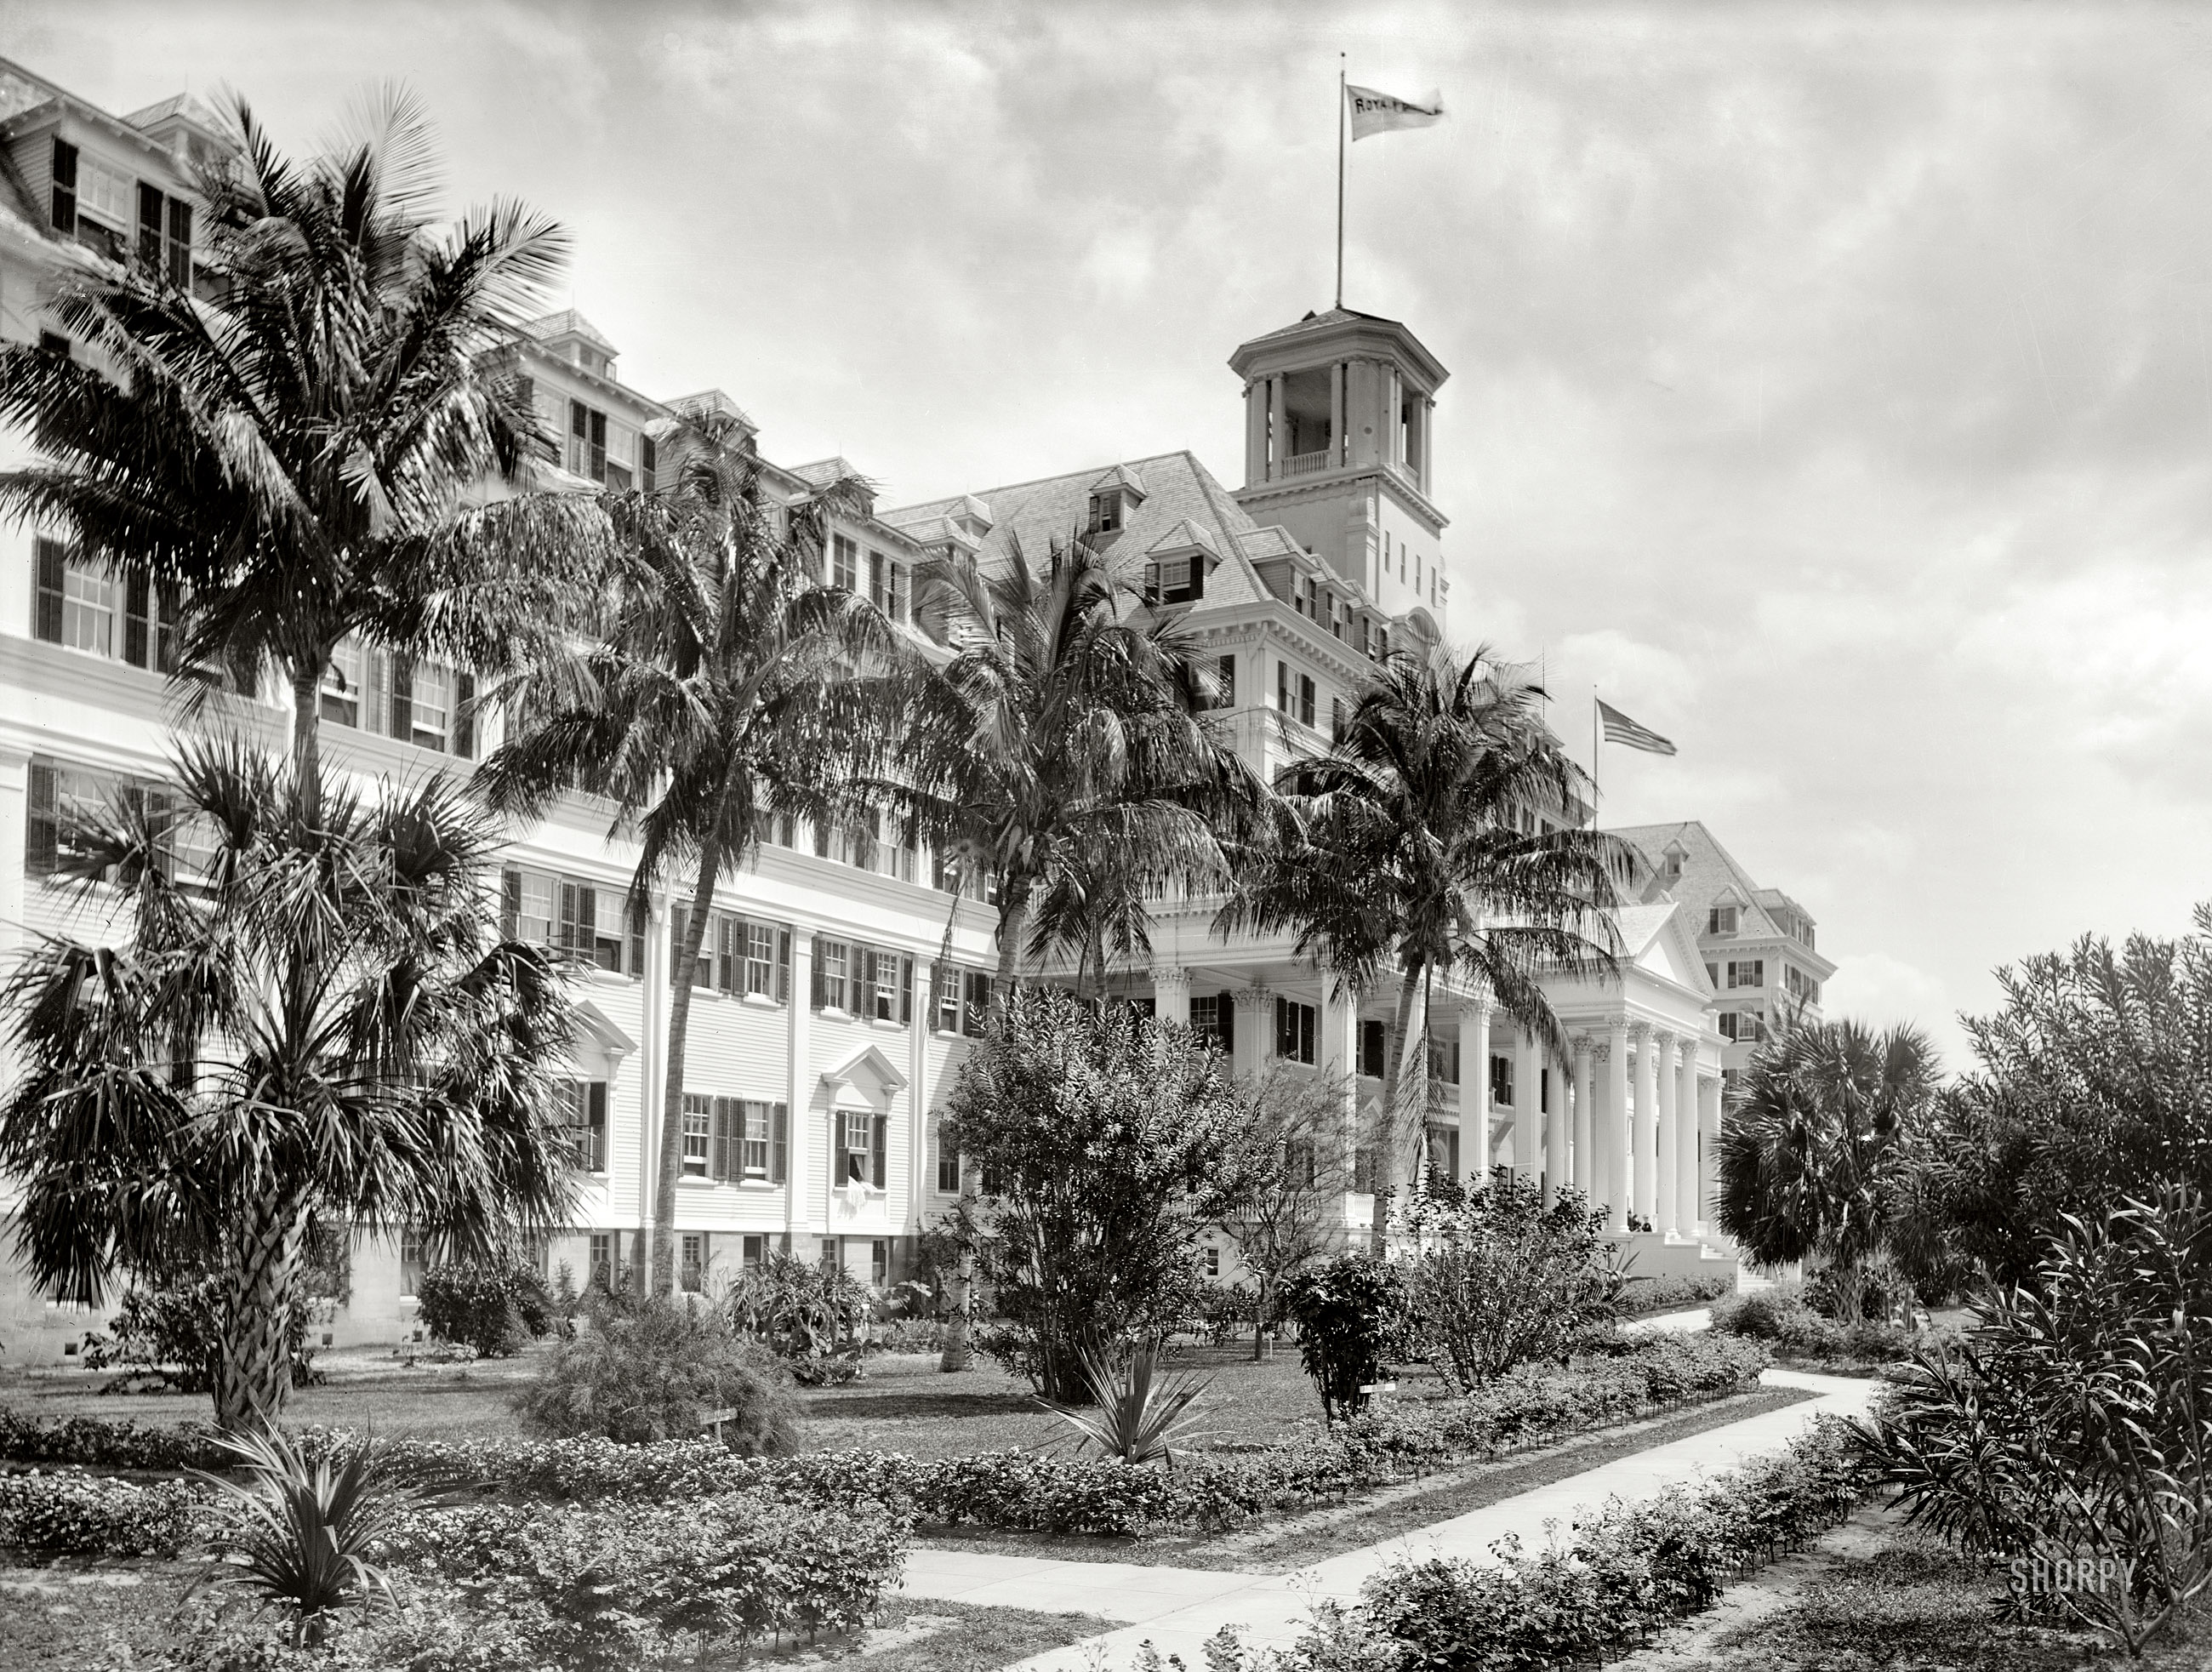 Florida circa 1900. "Hotel Royal Poinciana, Palm Beach." Shown here is the merest sliver of Henry Flagler's gigantic hotel, at one time the largest wood-frame structure in the world. Detroit Publishing glass negative. View full size.